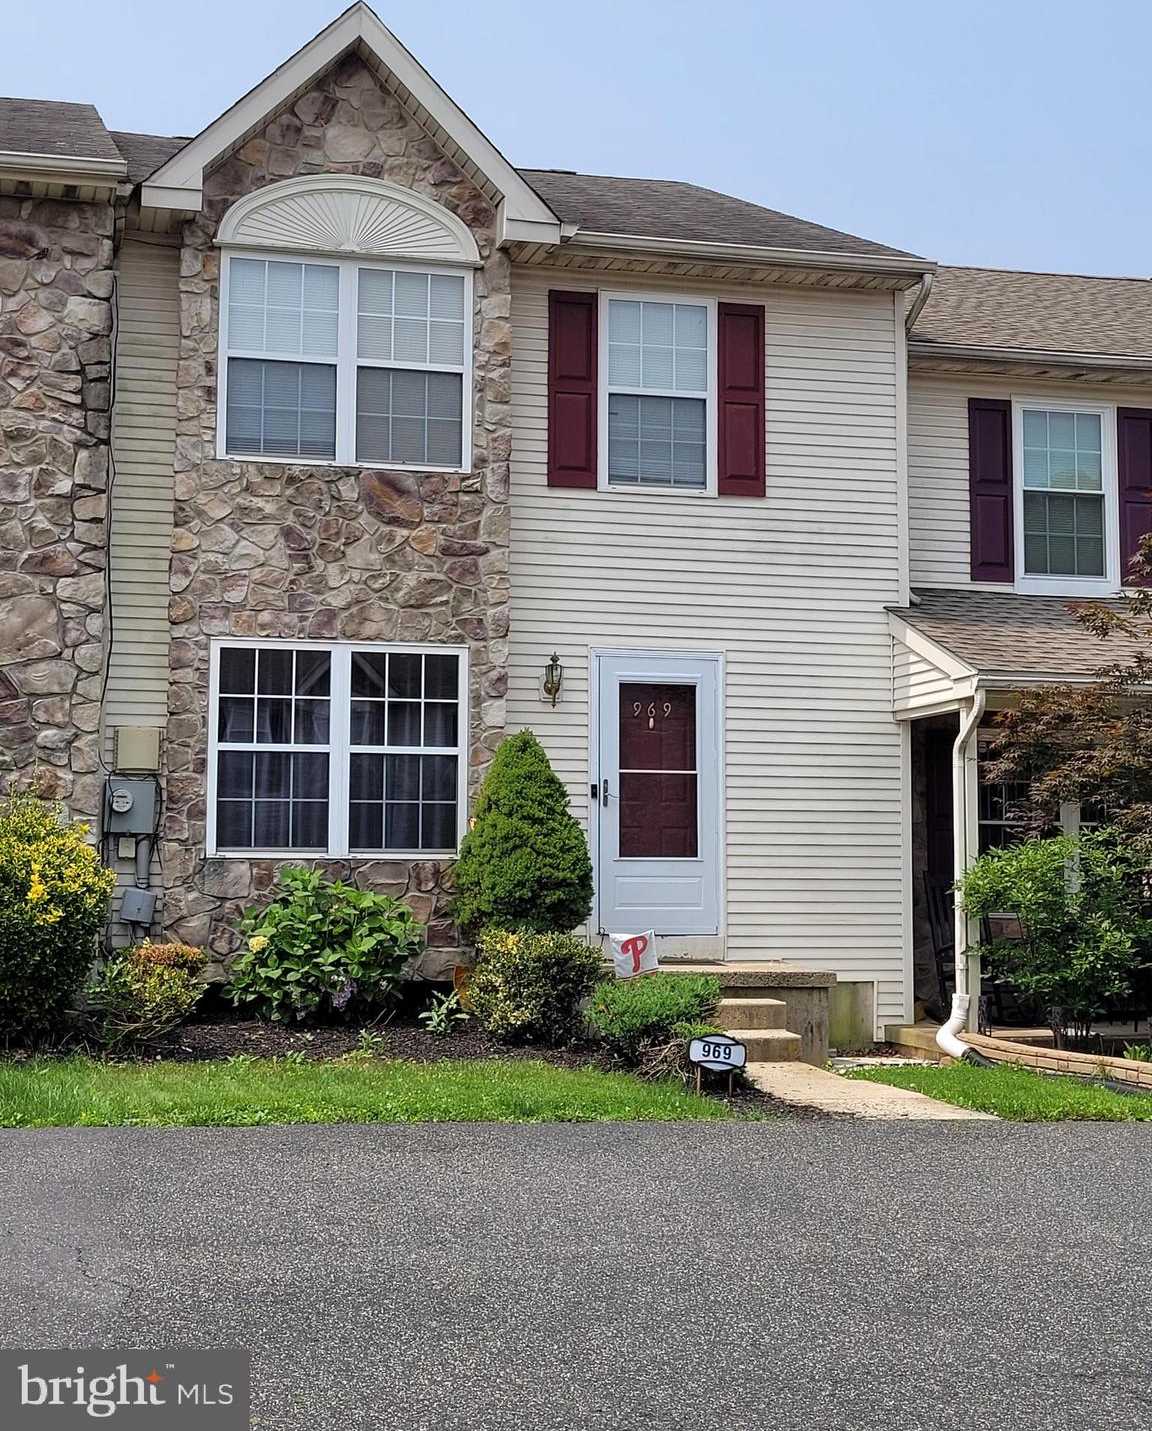 View COLLEGEVILLE, PA 19426 townhome